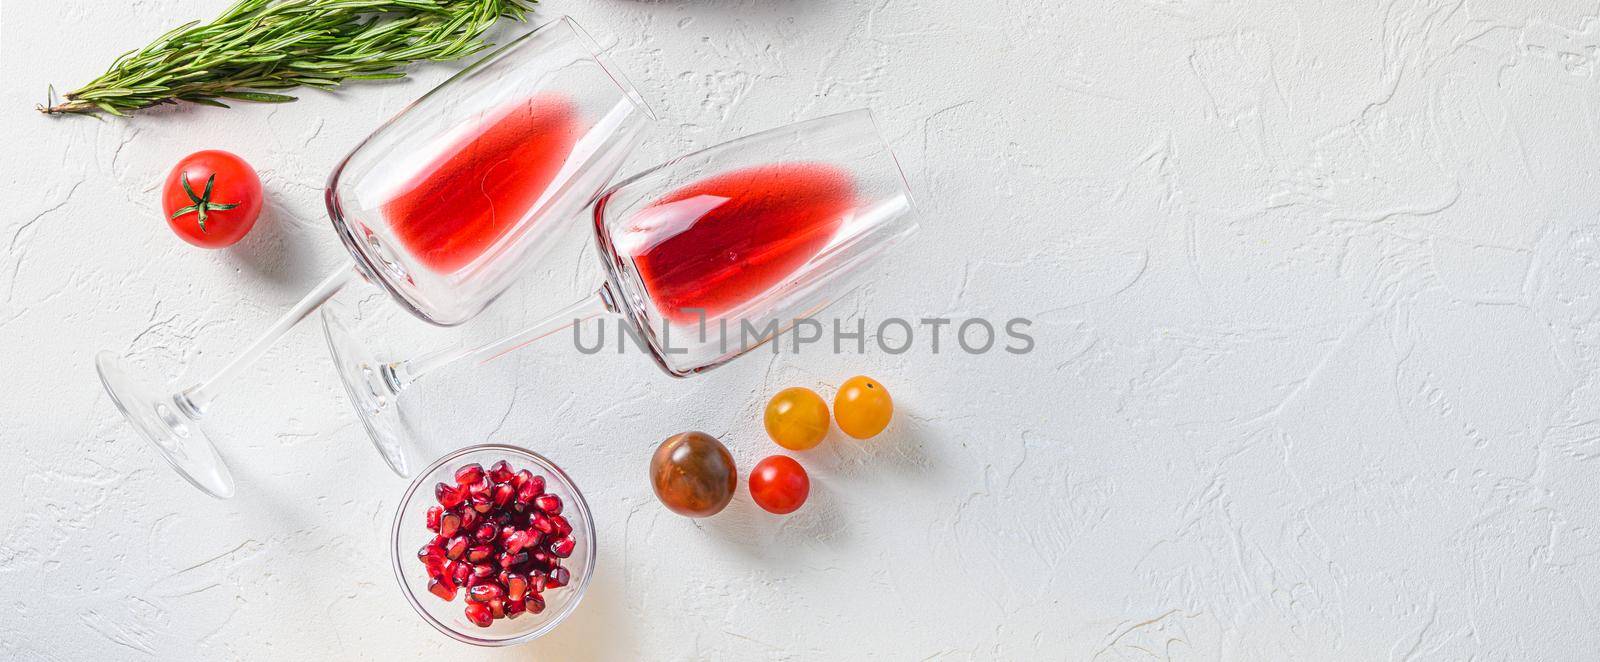 Two glass of red wine near herbs for grill over white concrete table top view. Big banner size. Space for text. by Ilianesolenyi